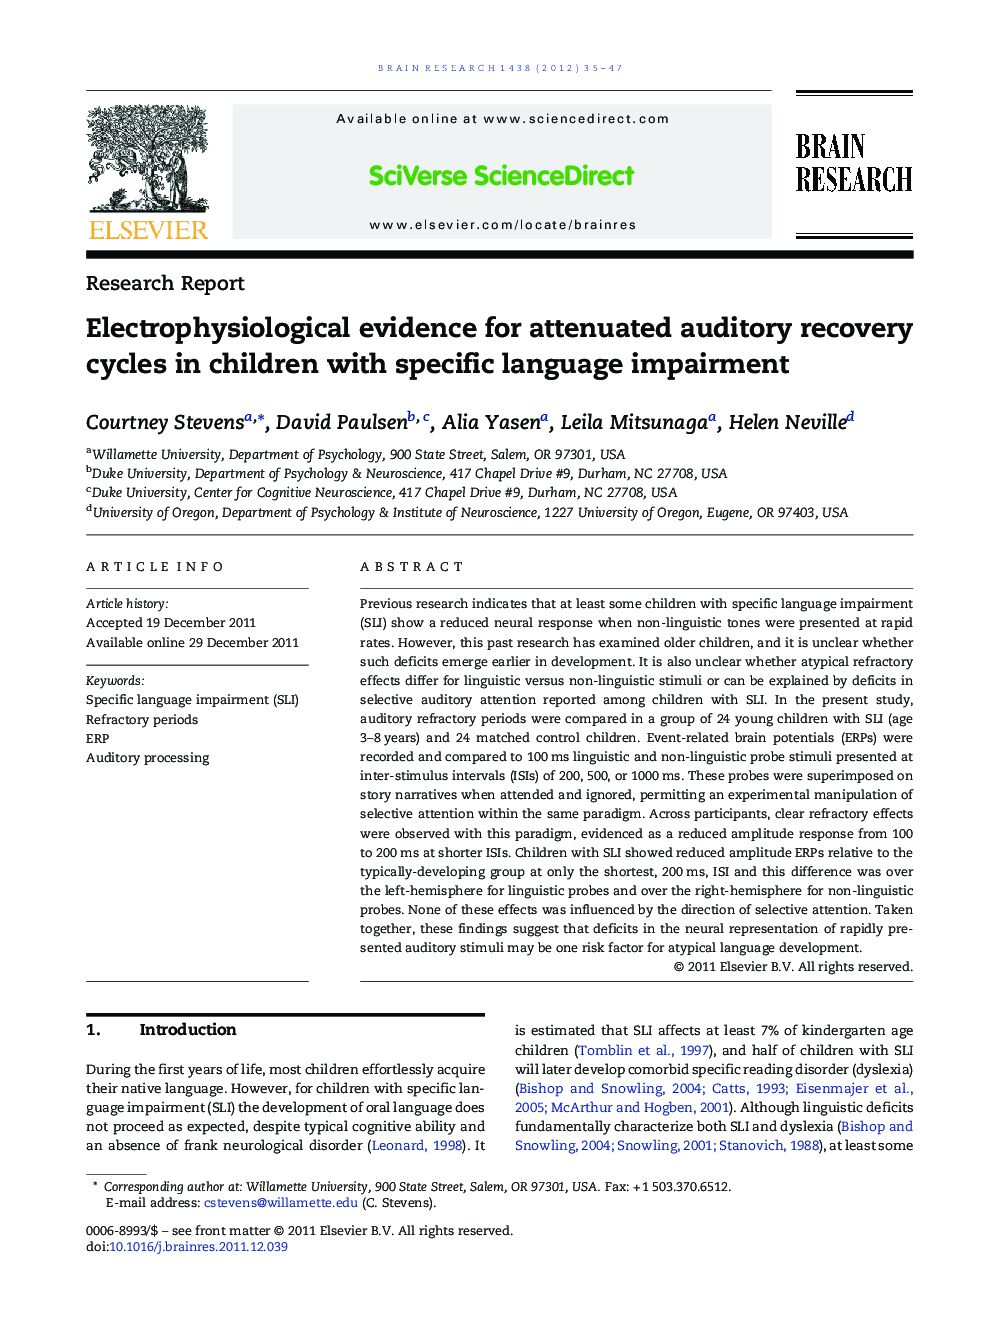 Electrophysiological evidence for attenuated auditory recovery cycles in children with specific language impairment